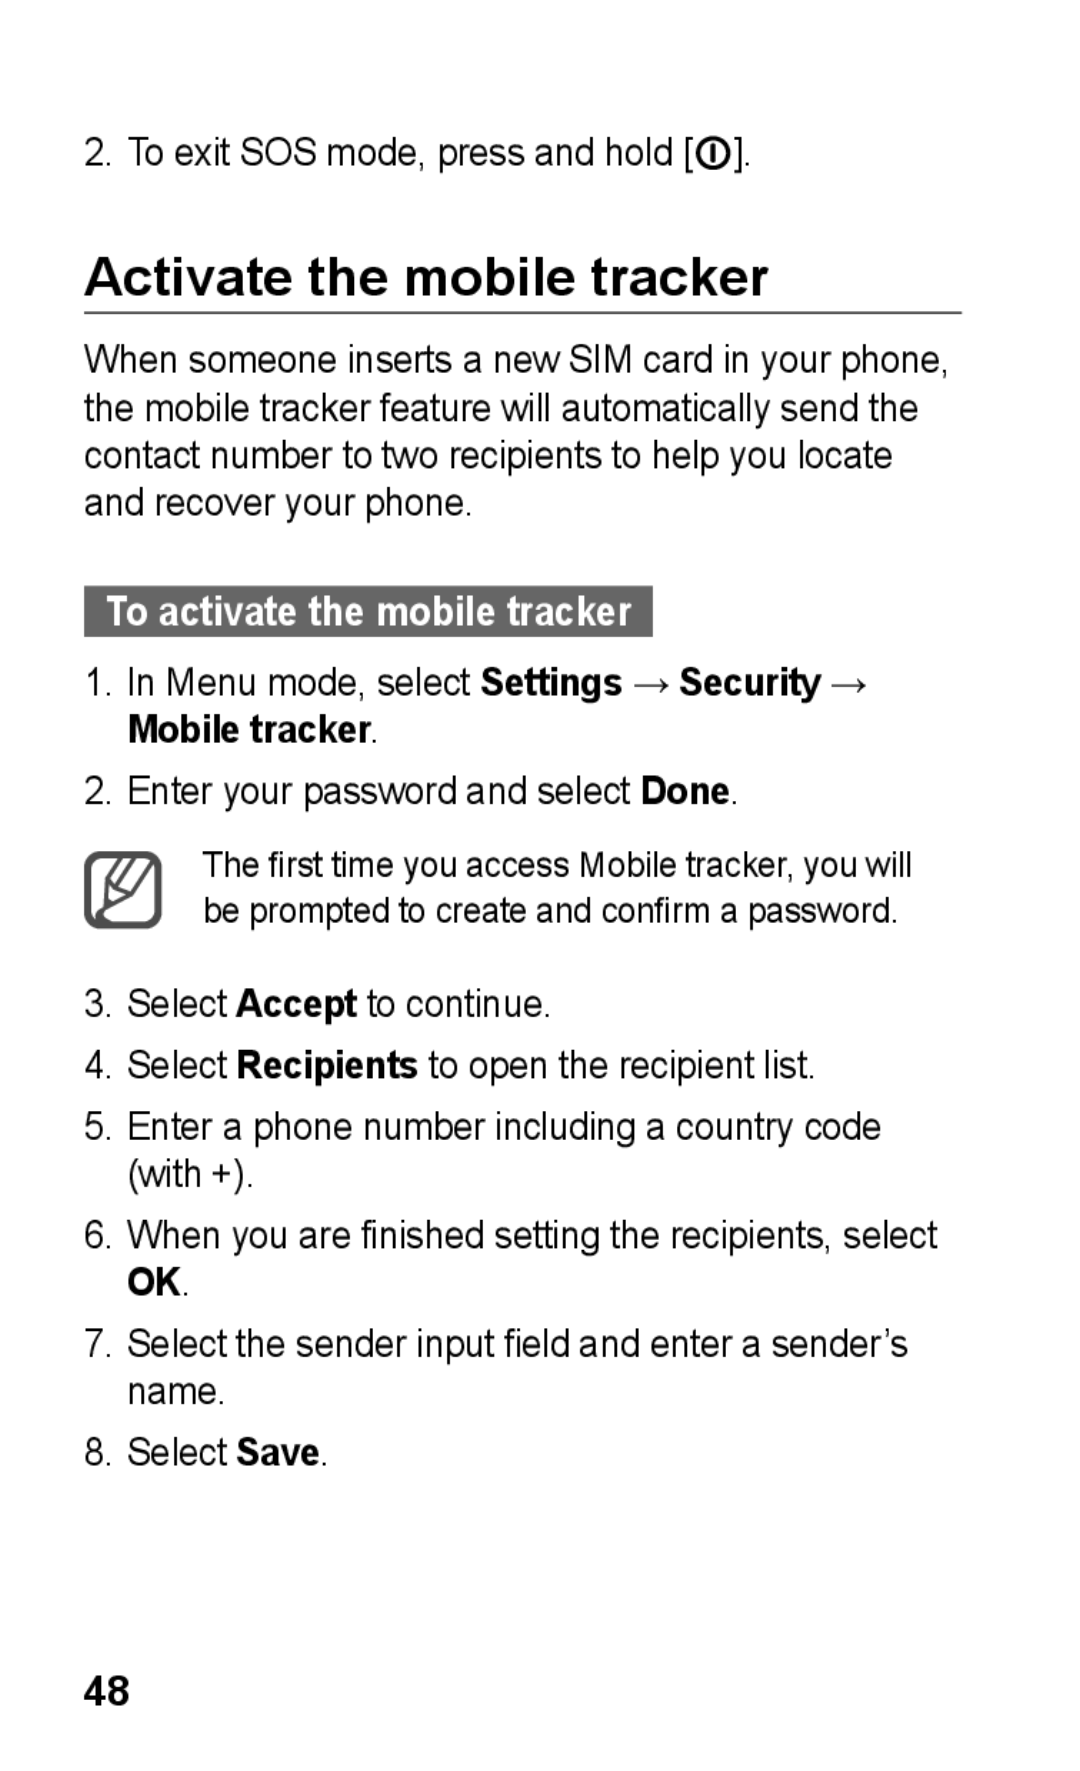 Samsung GT-S5260RWPMTL, GT-S5260RWPDBT, GT-S5260OKPDBT manual Activate the mobile tracker, To activate the mobile tracker 